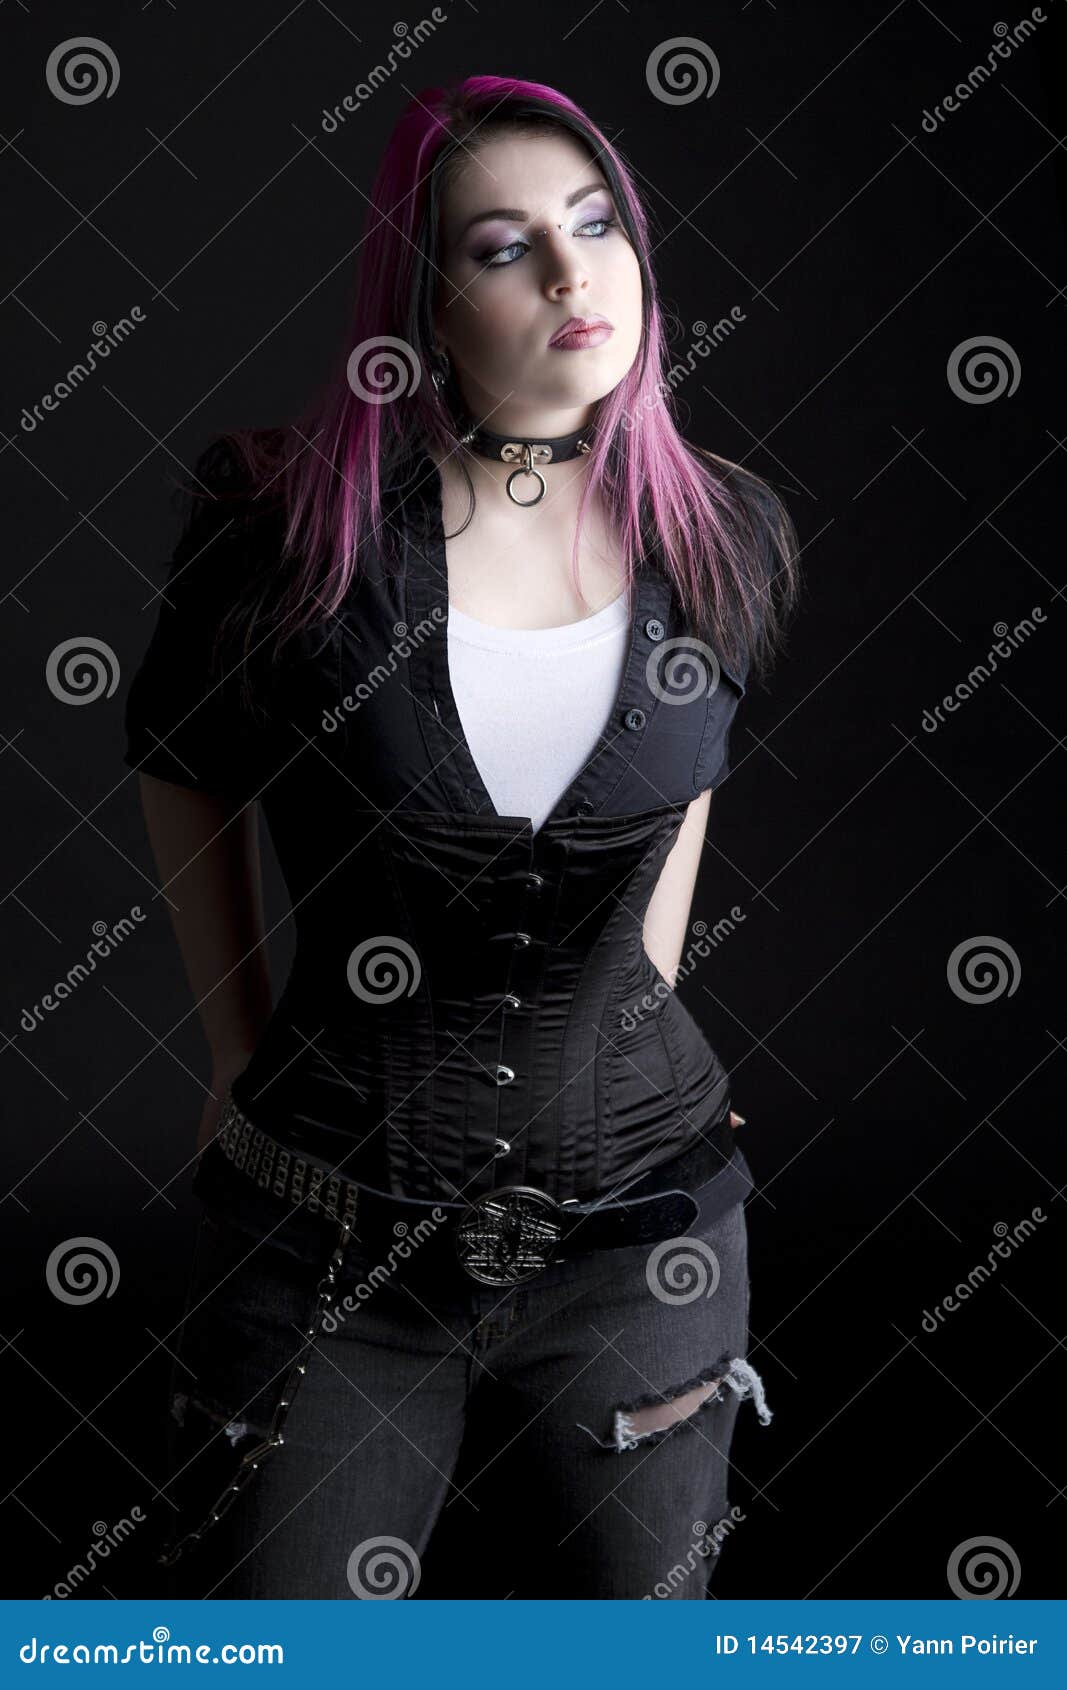 andrew wilmarth reccomend goth girl pictures cute pic